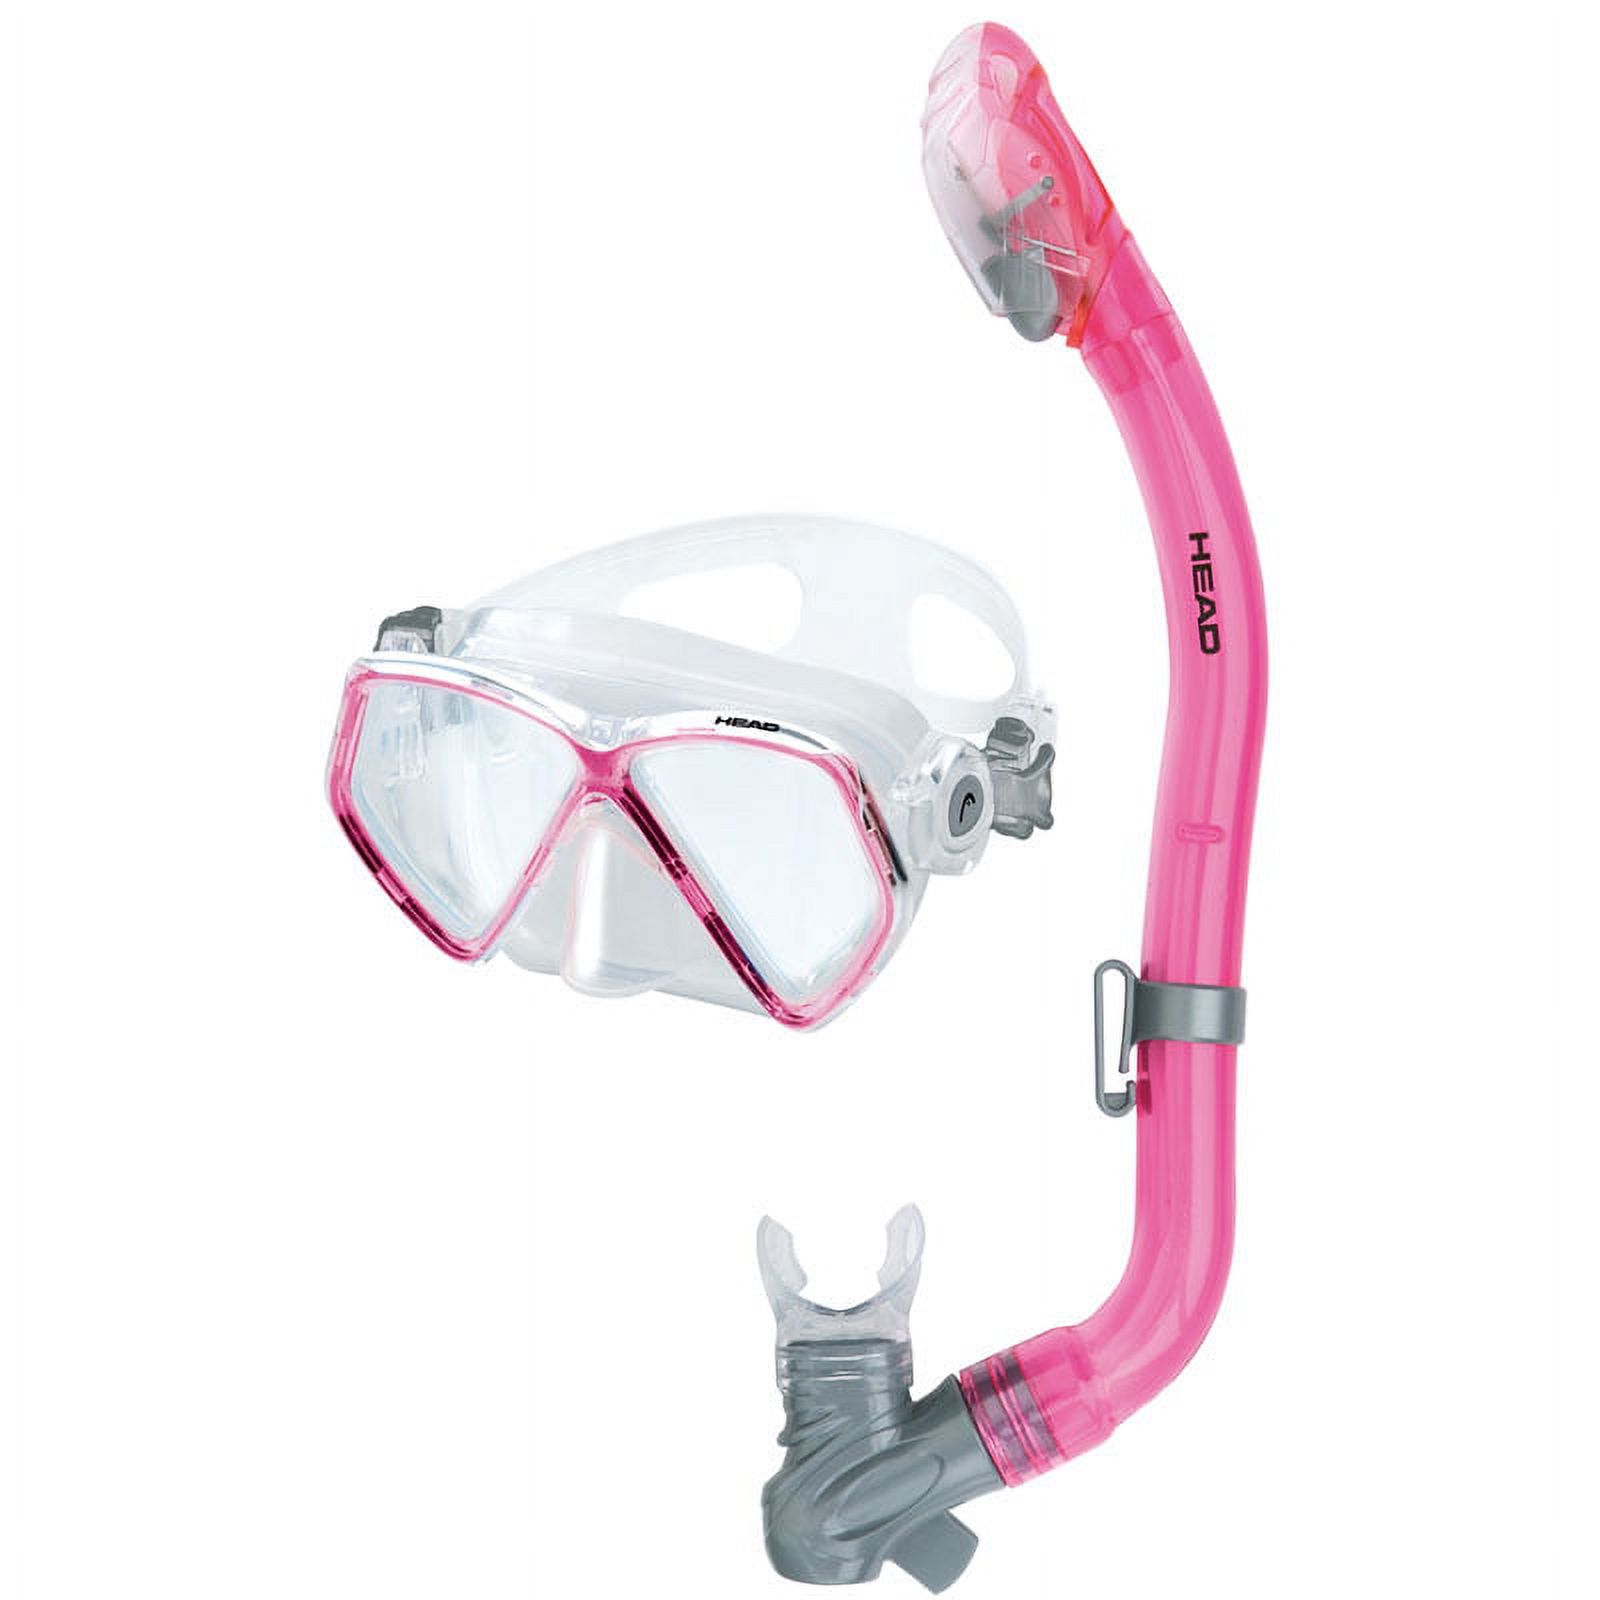 Mares Head Pirate Junior Mask - Snorkel Combo - Pink - image 1 of 2